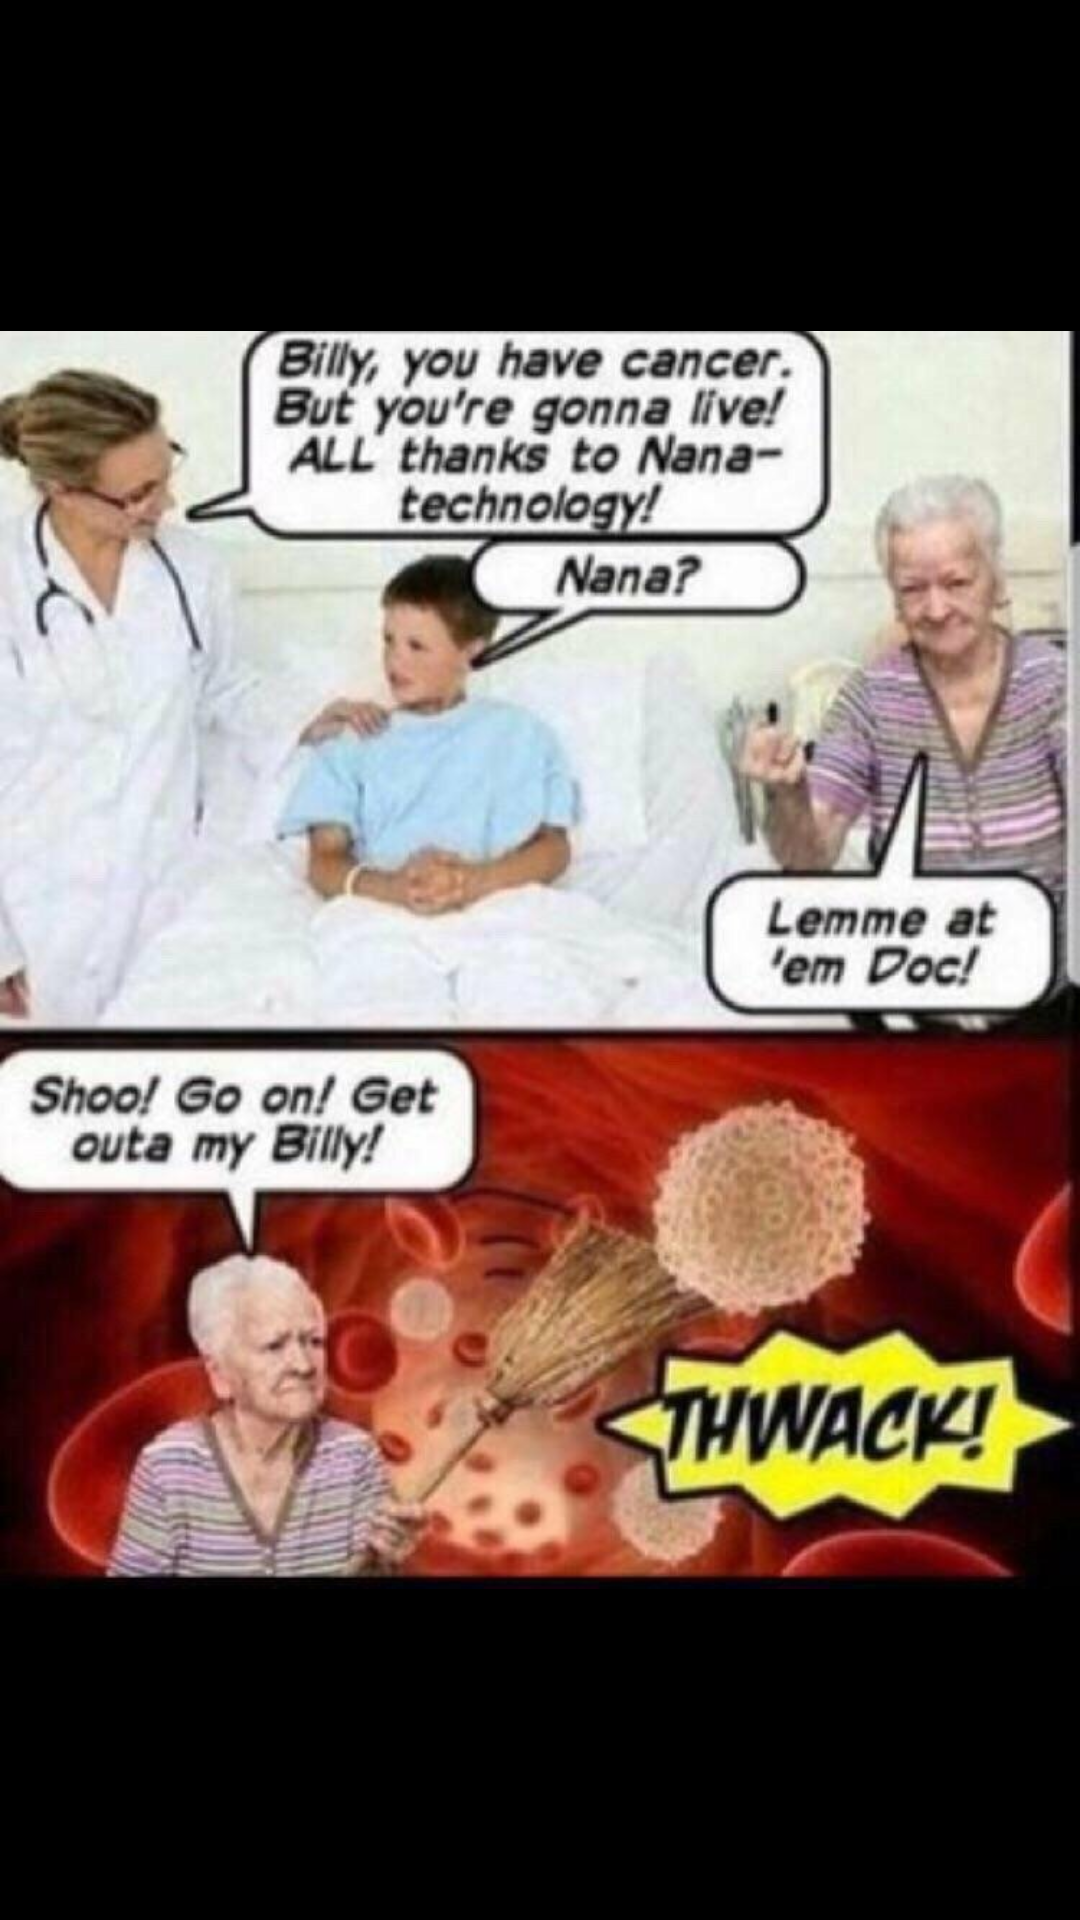 he's cured meme - Billy, you have cancer. But you're gonna live! All thanks to Nana technology! Nana? Lemme at em Pec Shoo! Go on! Get outa my Billy! Thwack!